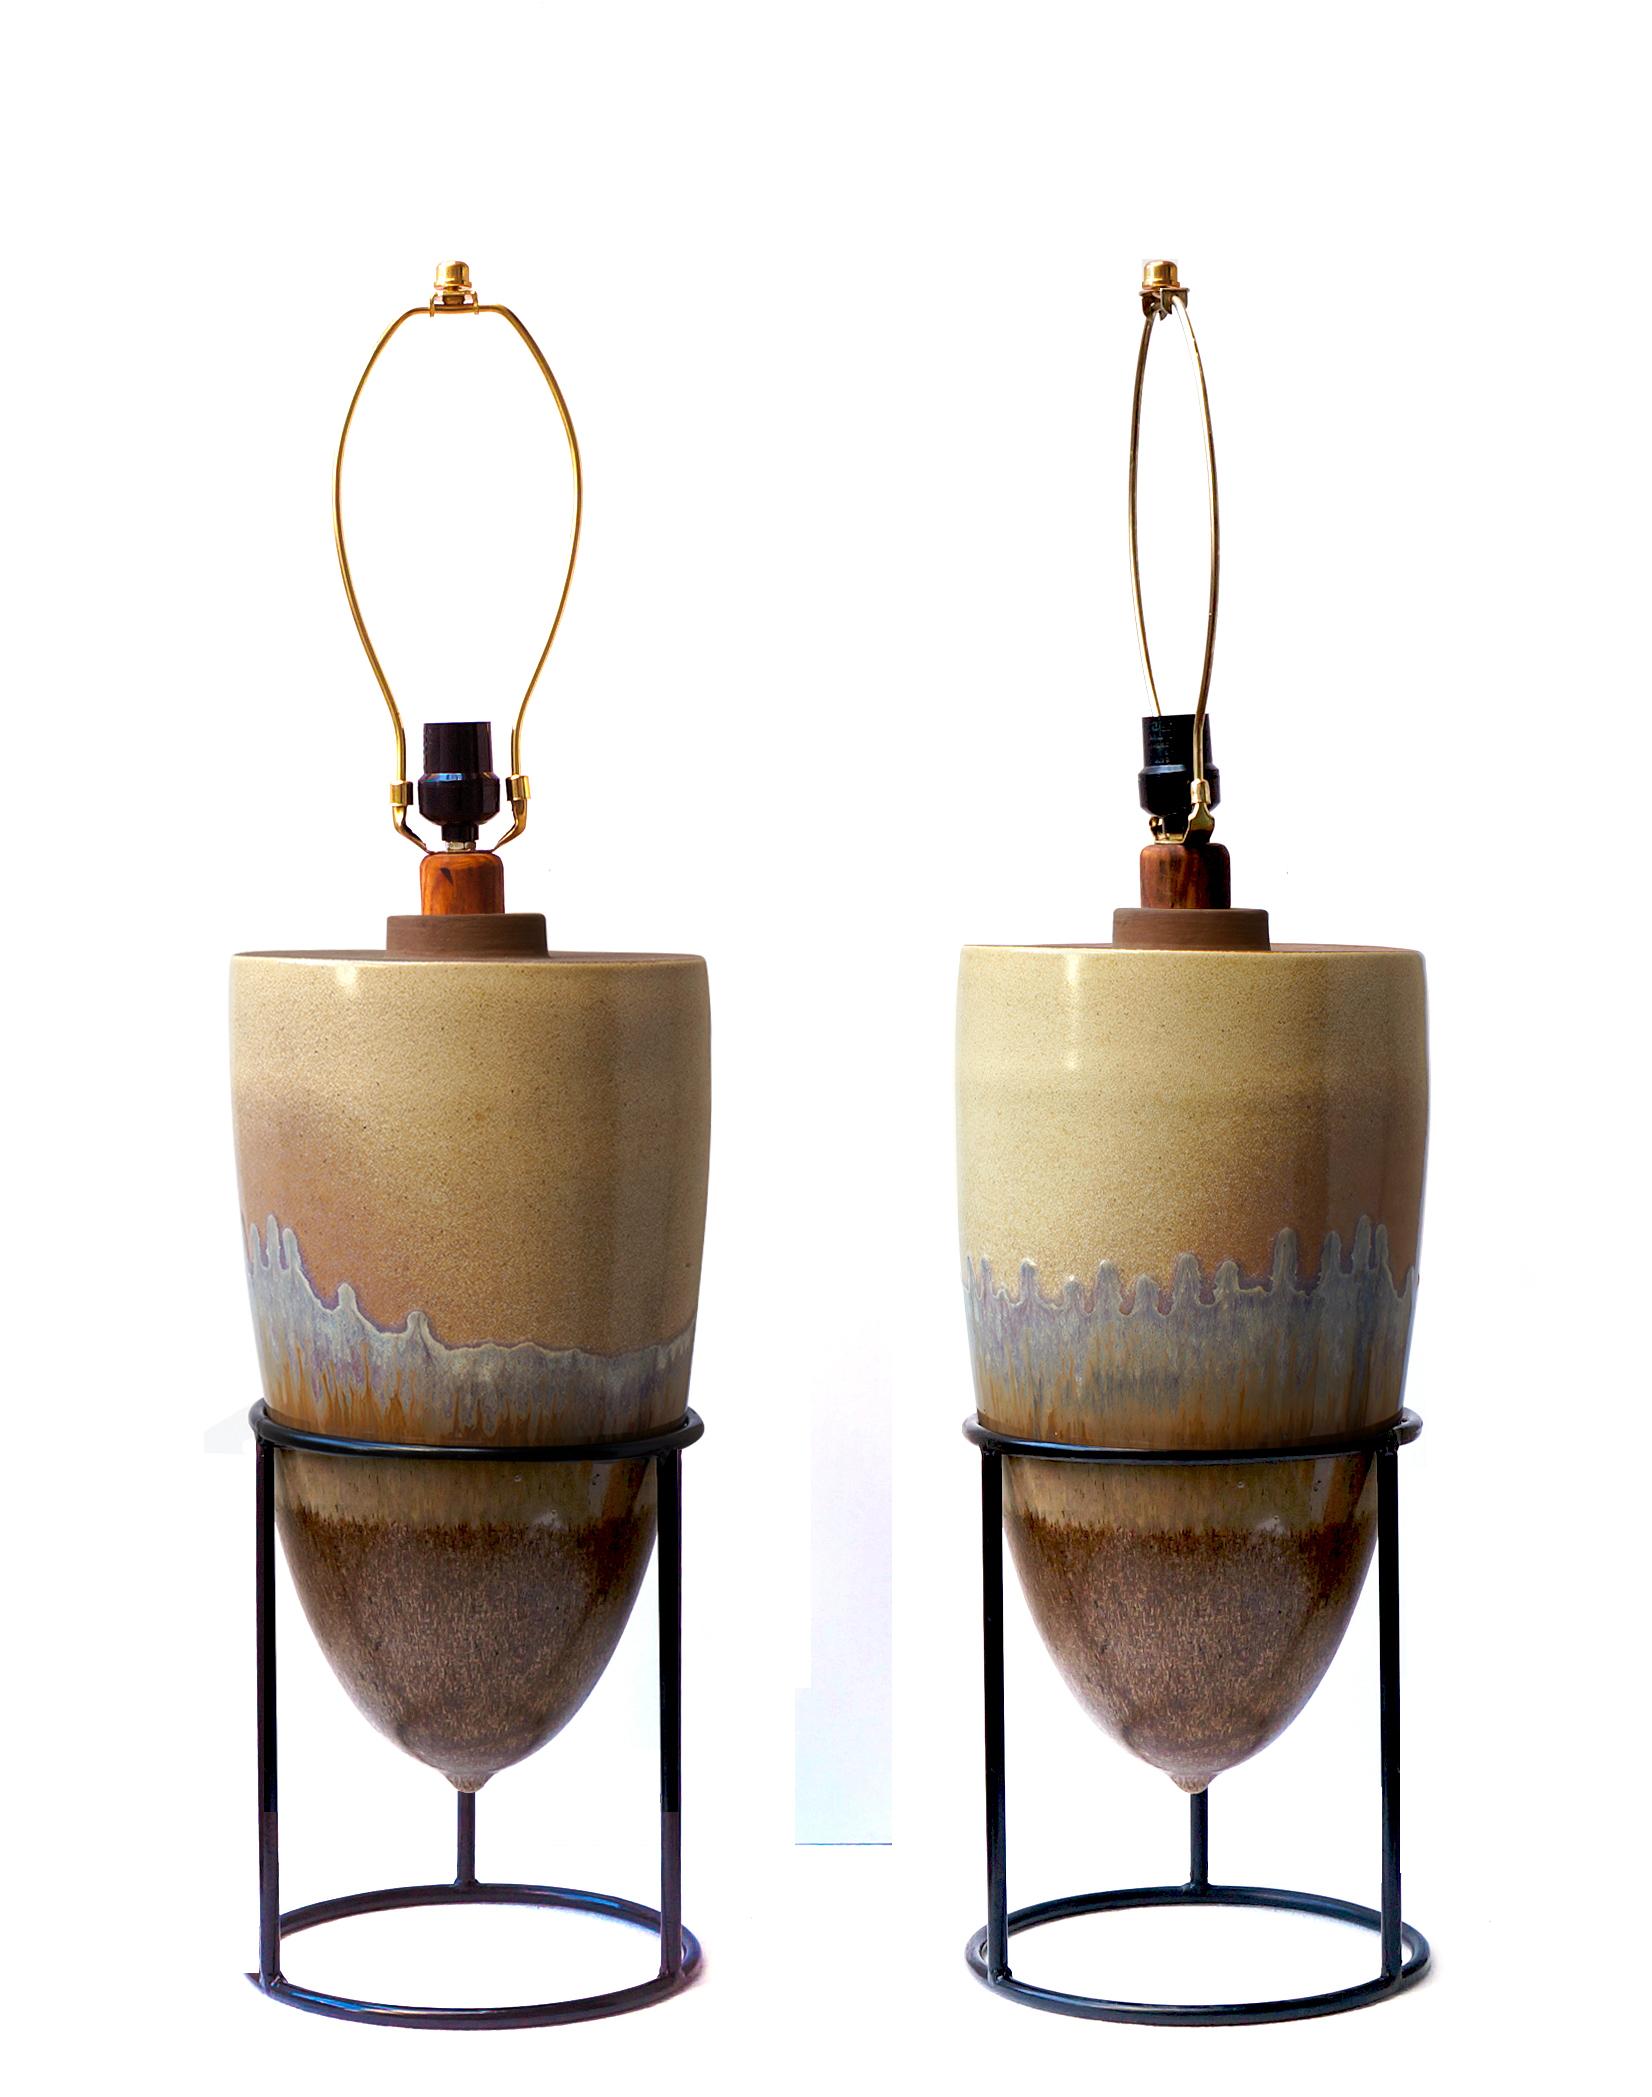 The midcentury period belongs to this spectacular pair of lamps created in ceramics suspended in a steel structure. Ceramic glazed in earth tones, with a small application of wood.
The pair of lamps is sold without a lampshade, for an extra cost we